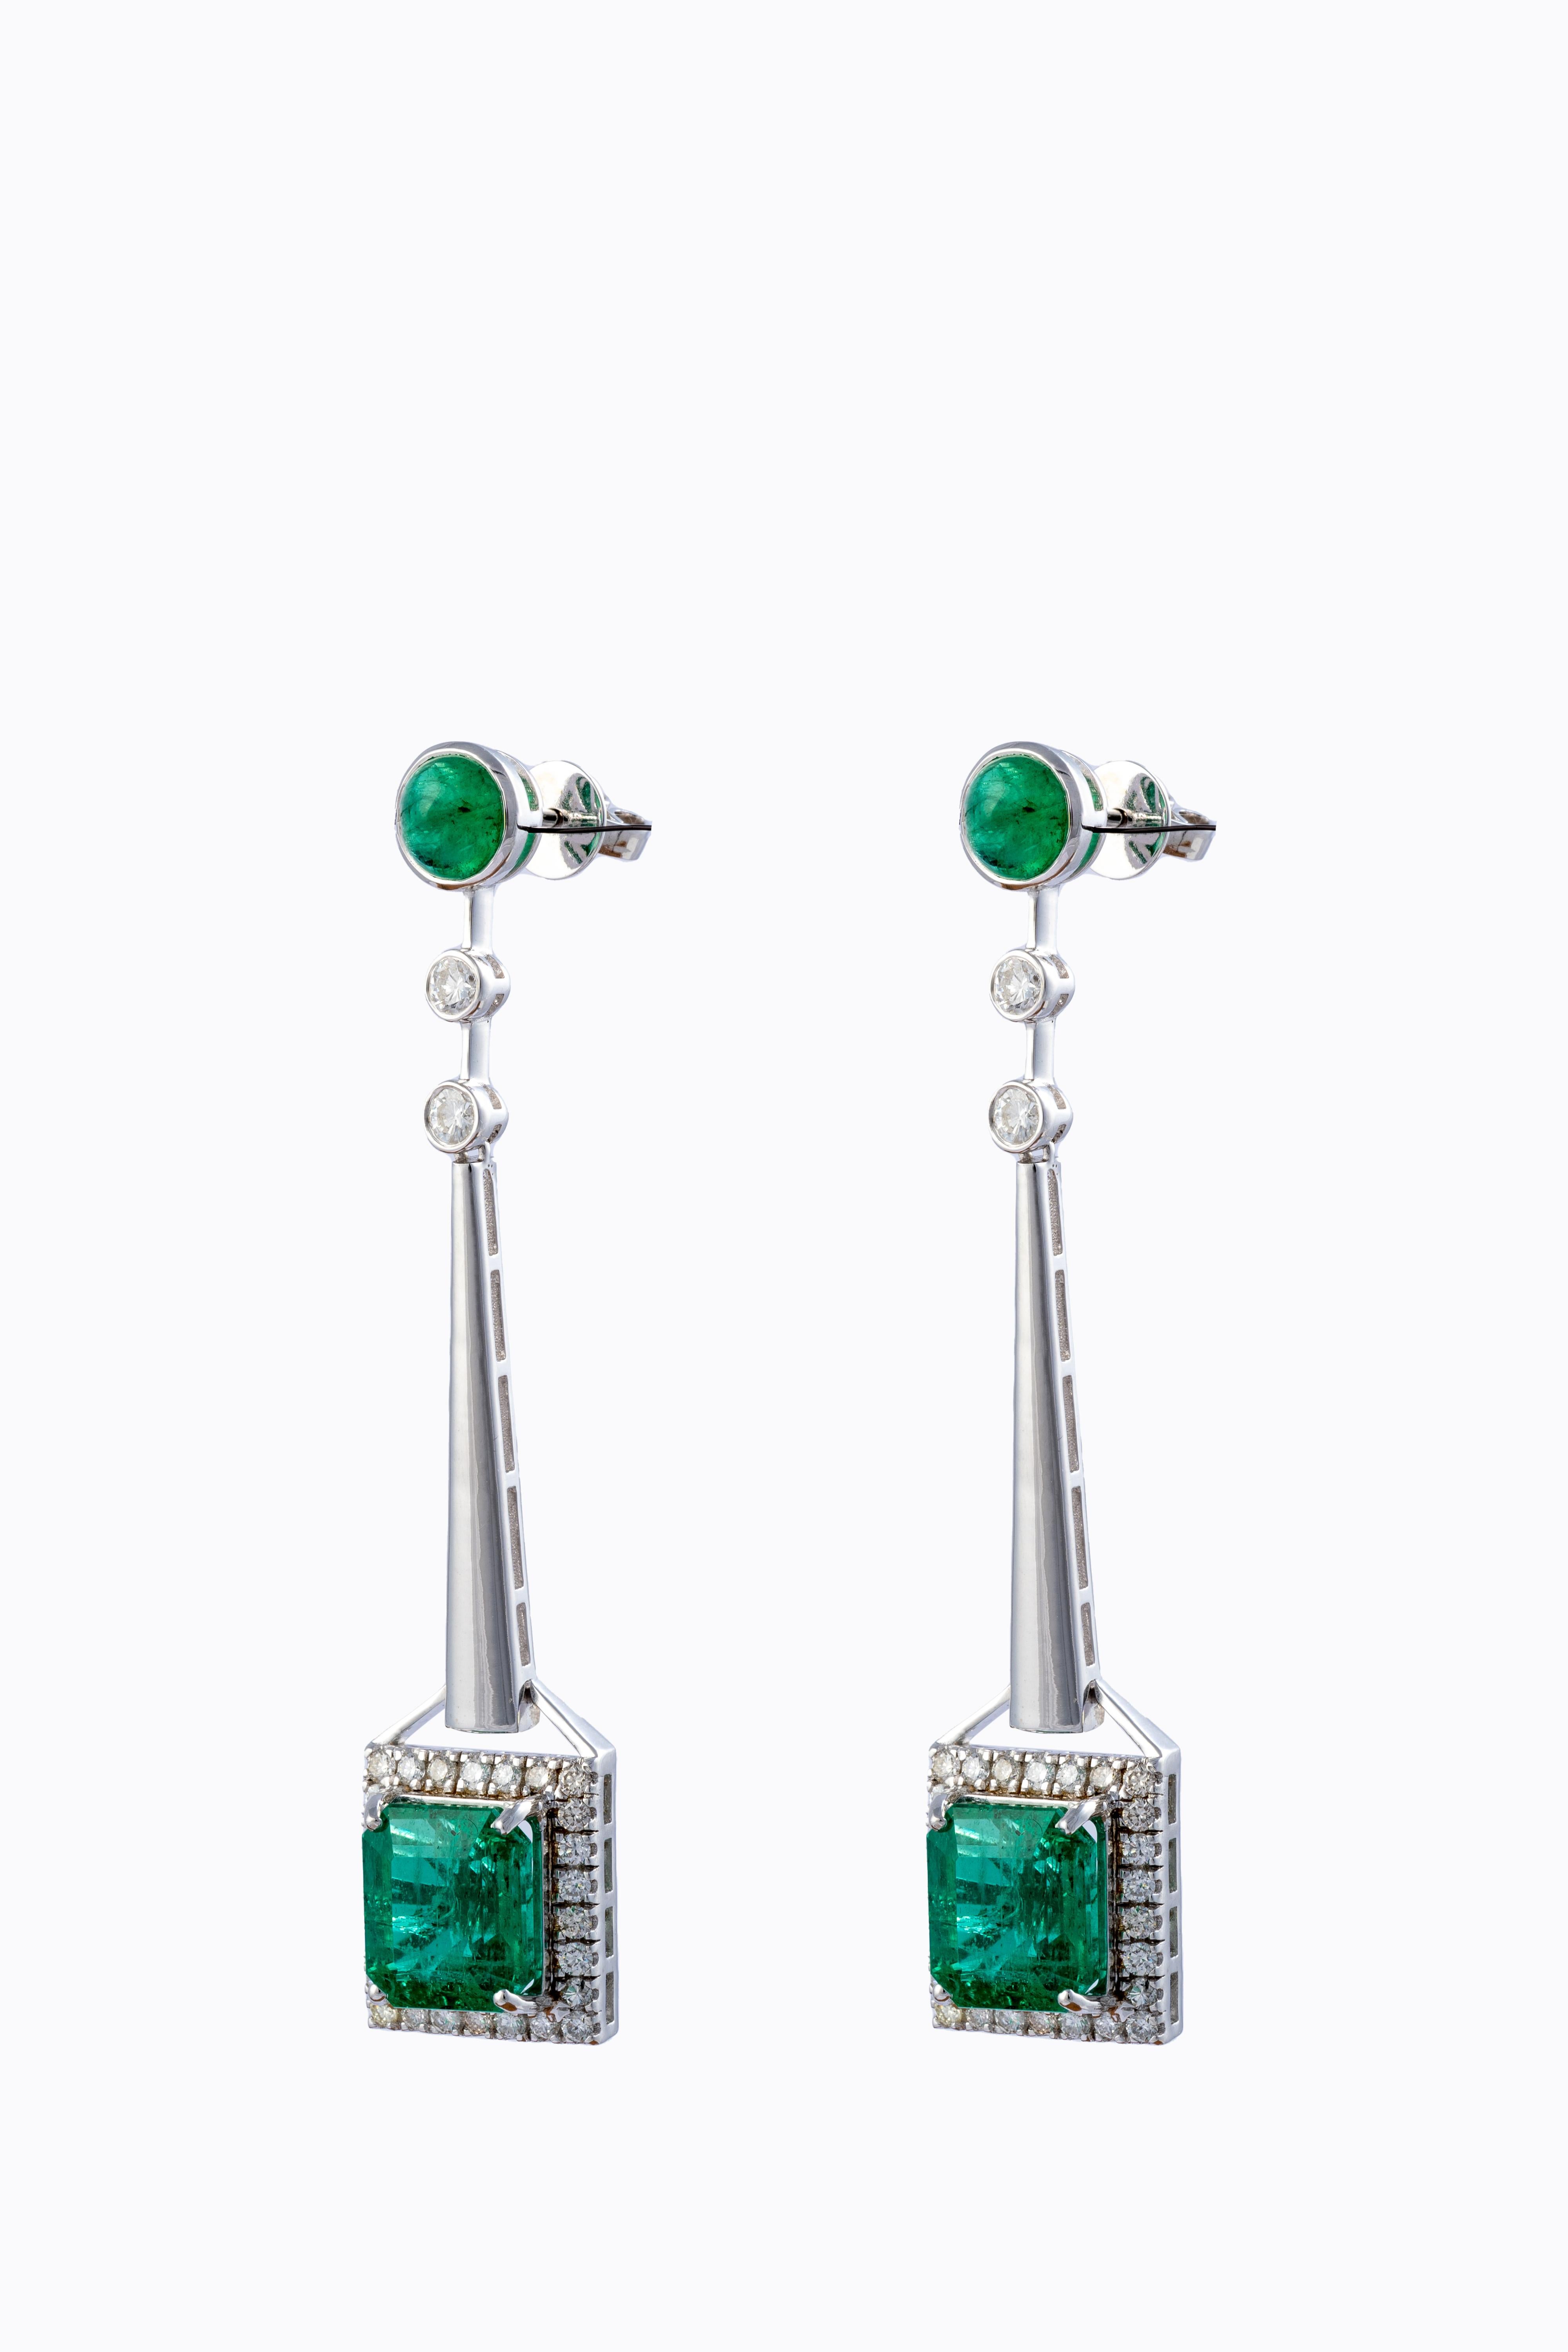 This is an elegant natural Zambian Emerald earrings with vsi clarity diamonds and G colour the 
emsrald are of very high quality
emeralds : 10.52cts
diamonds : 1.32cts
gold : 9.58gms 
very hard to capture the true color and luster of the stone, I